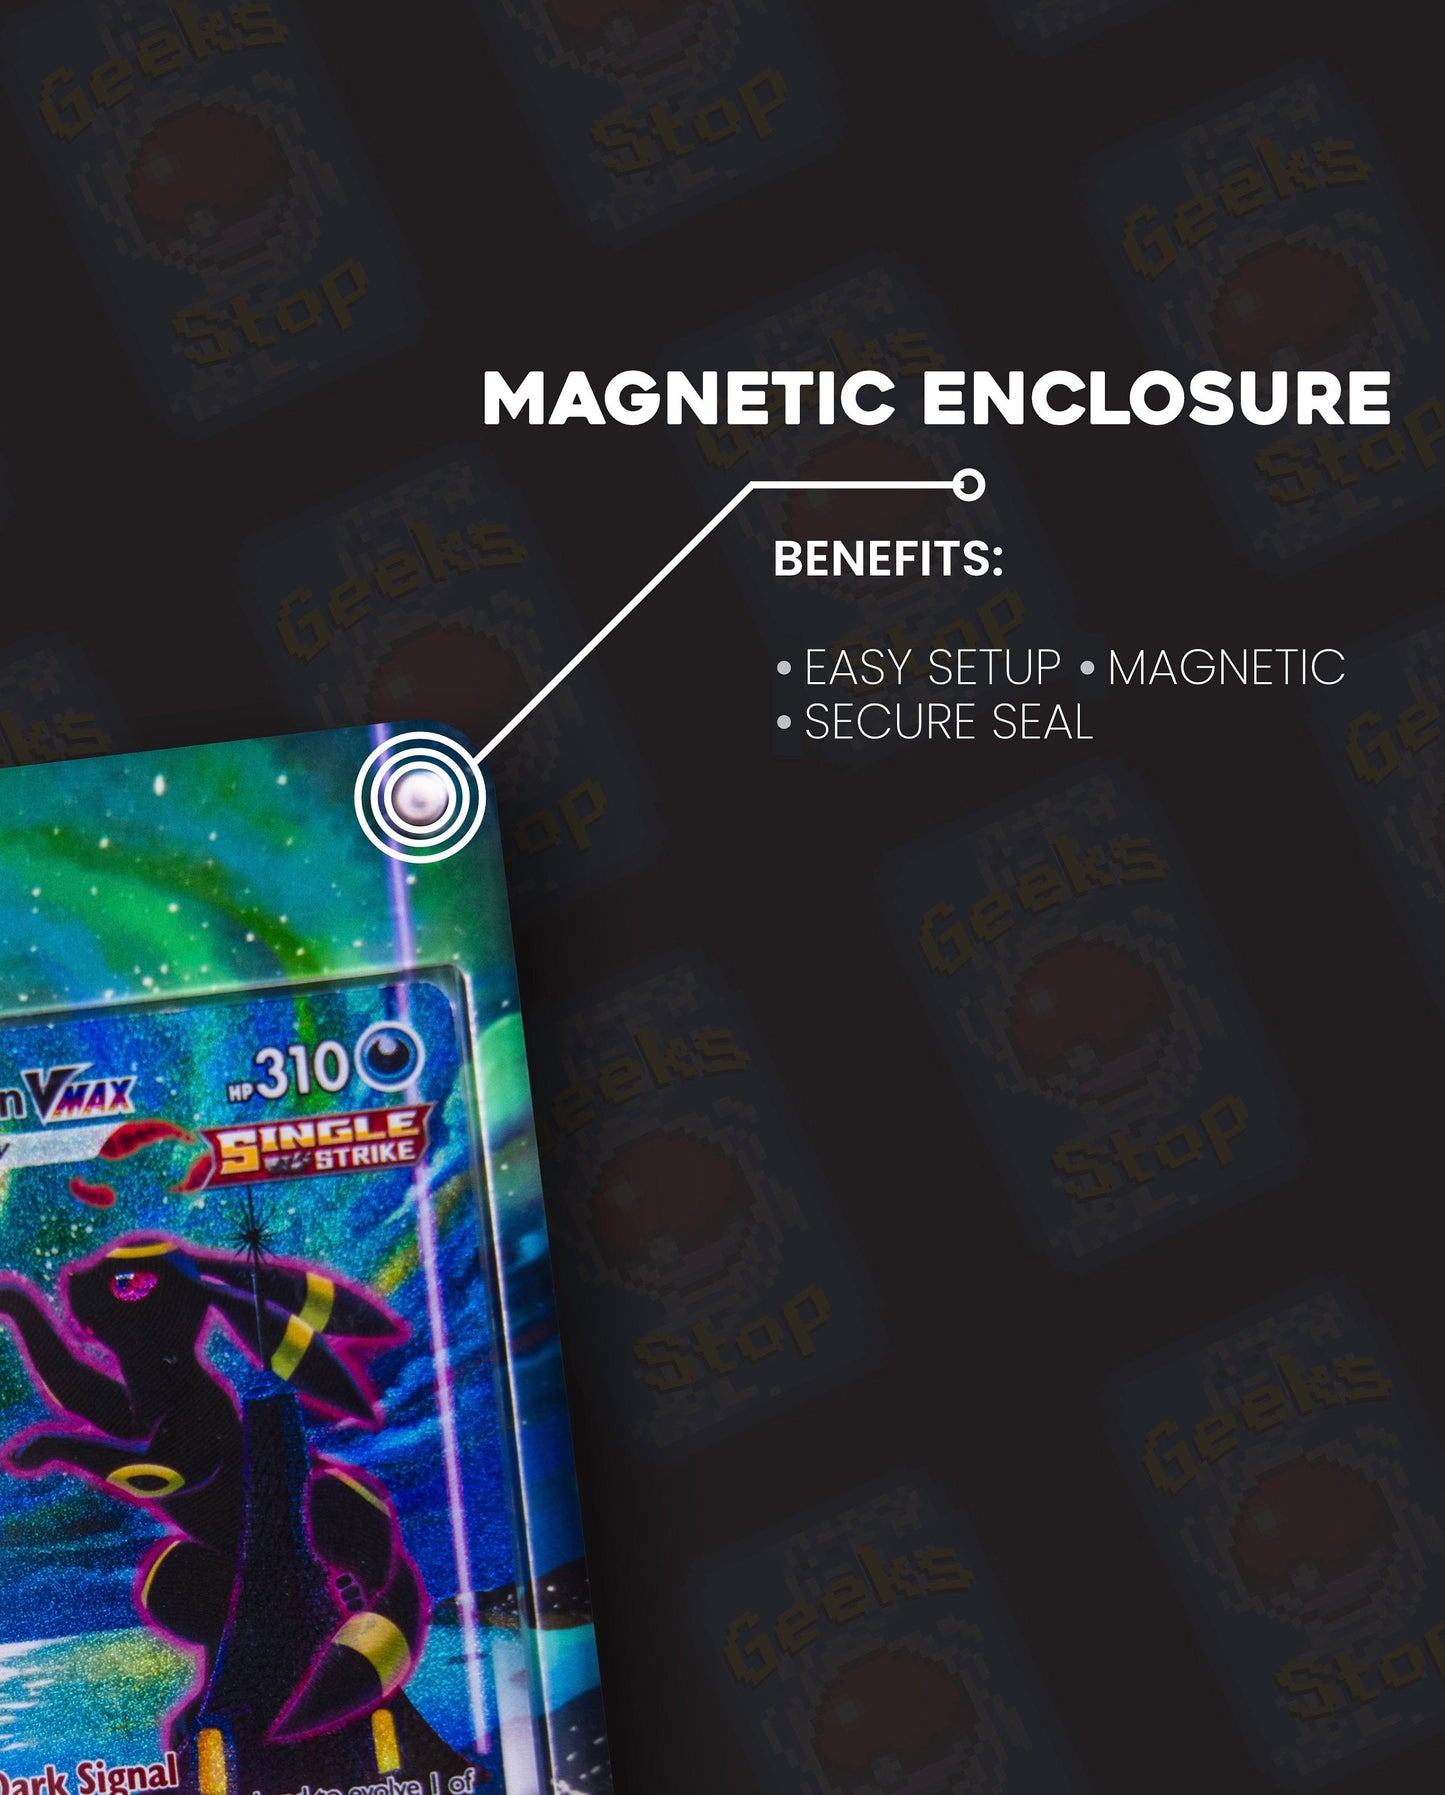 Mewtwo & Mew GX | Card Display Case Extended Art for Pokemon Card